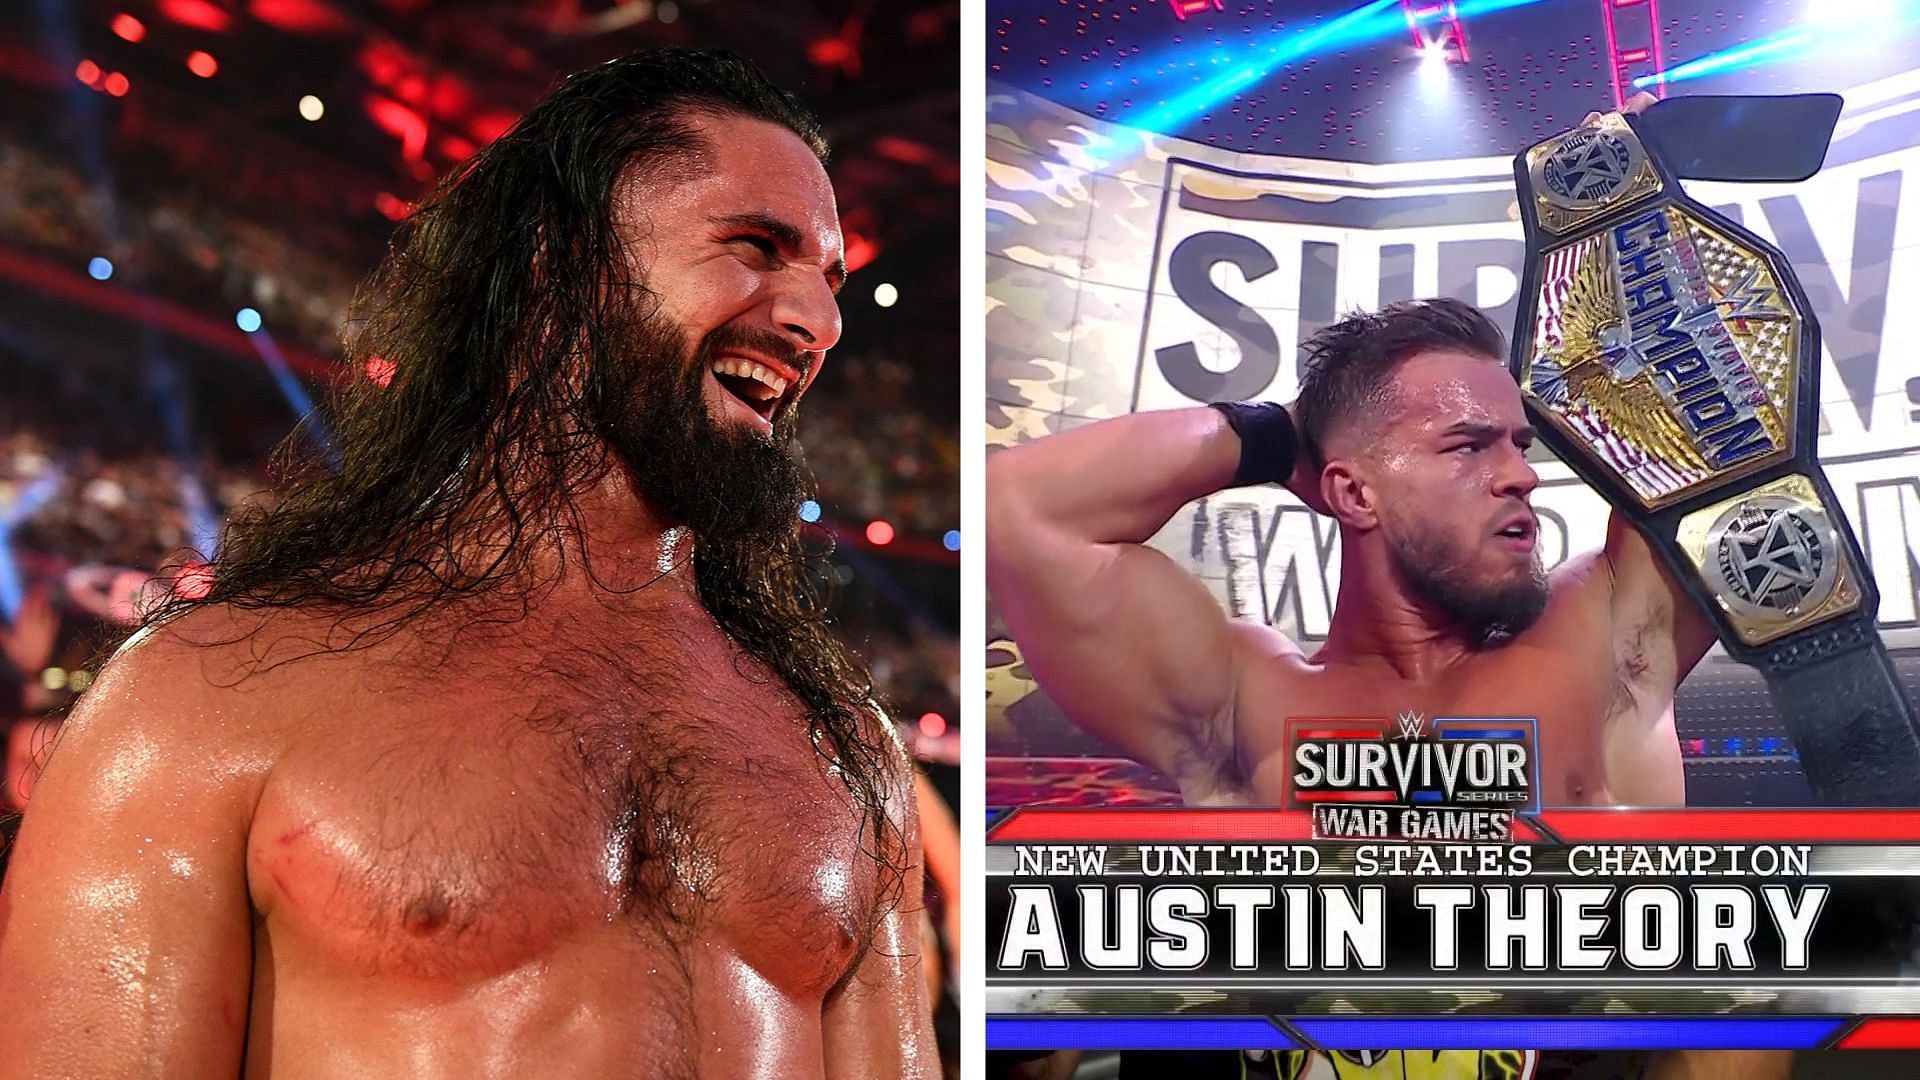 Seth Rollins surprisingly lost the United States Championship at WWE Survivor Series WarGames 2022